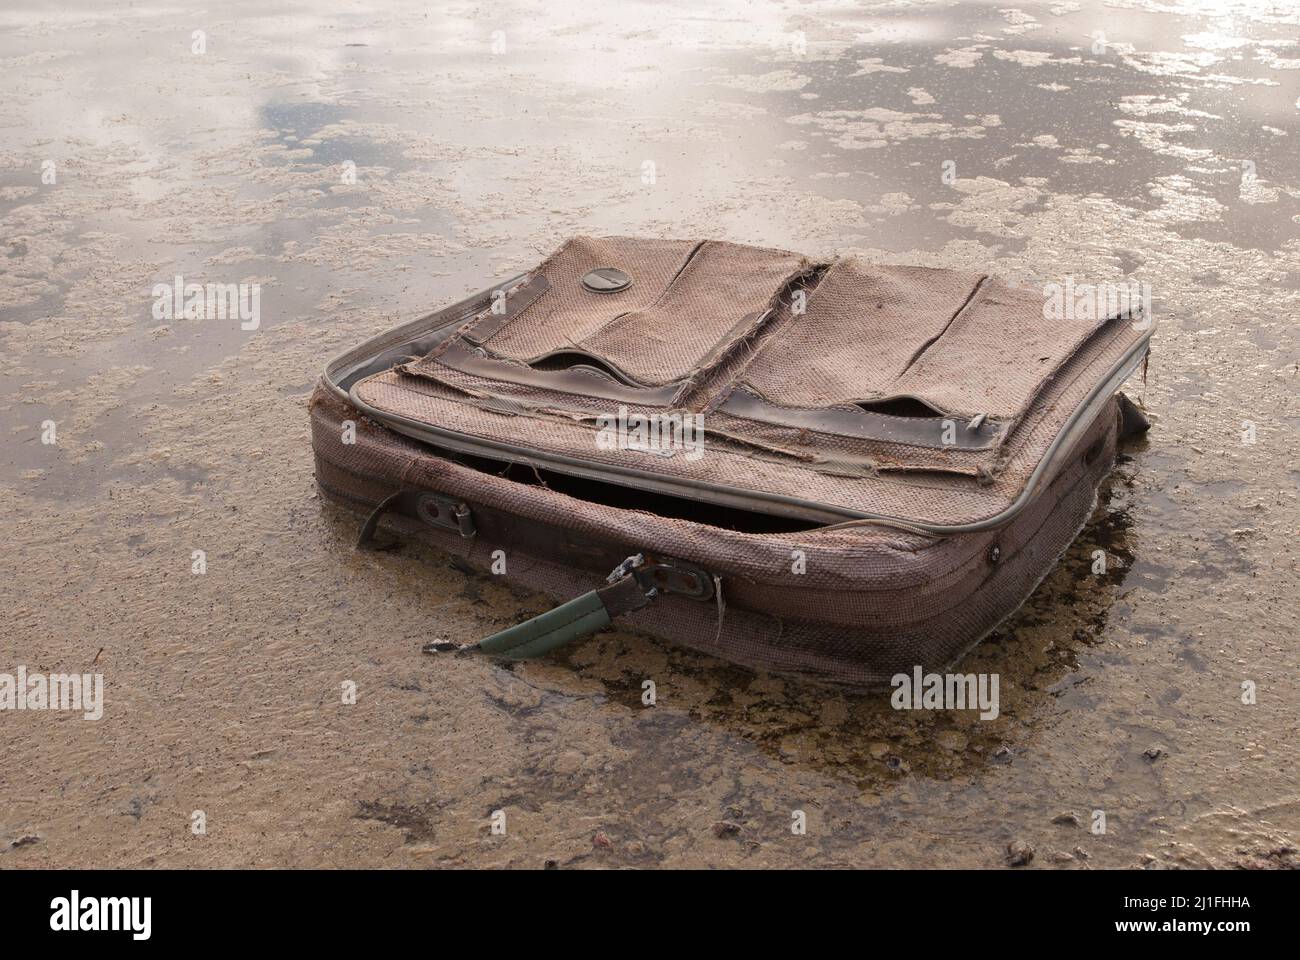 Old American Flyer travel suitcase discarded in the lake.Trashed, old suitcase. Lost dream. No plans. Travel luggage left behind. American Flyer bag. Stock Photo